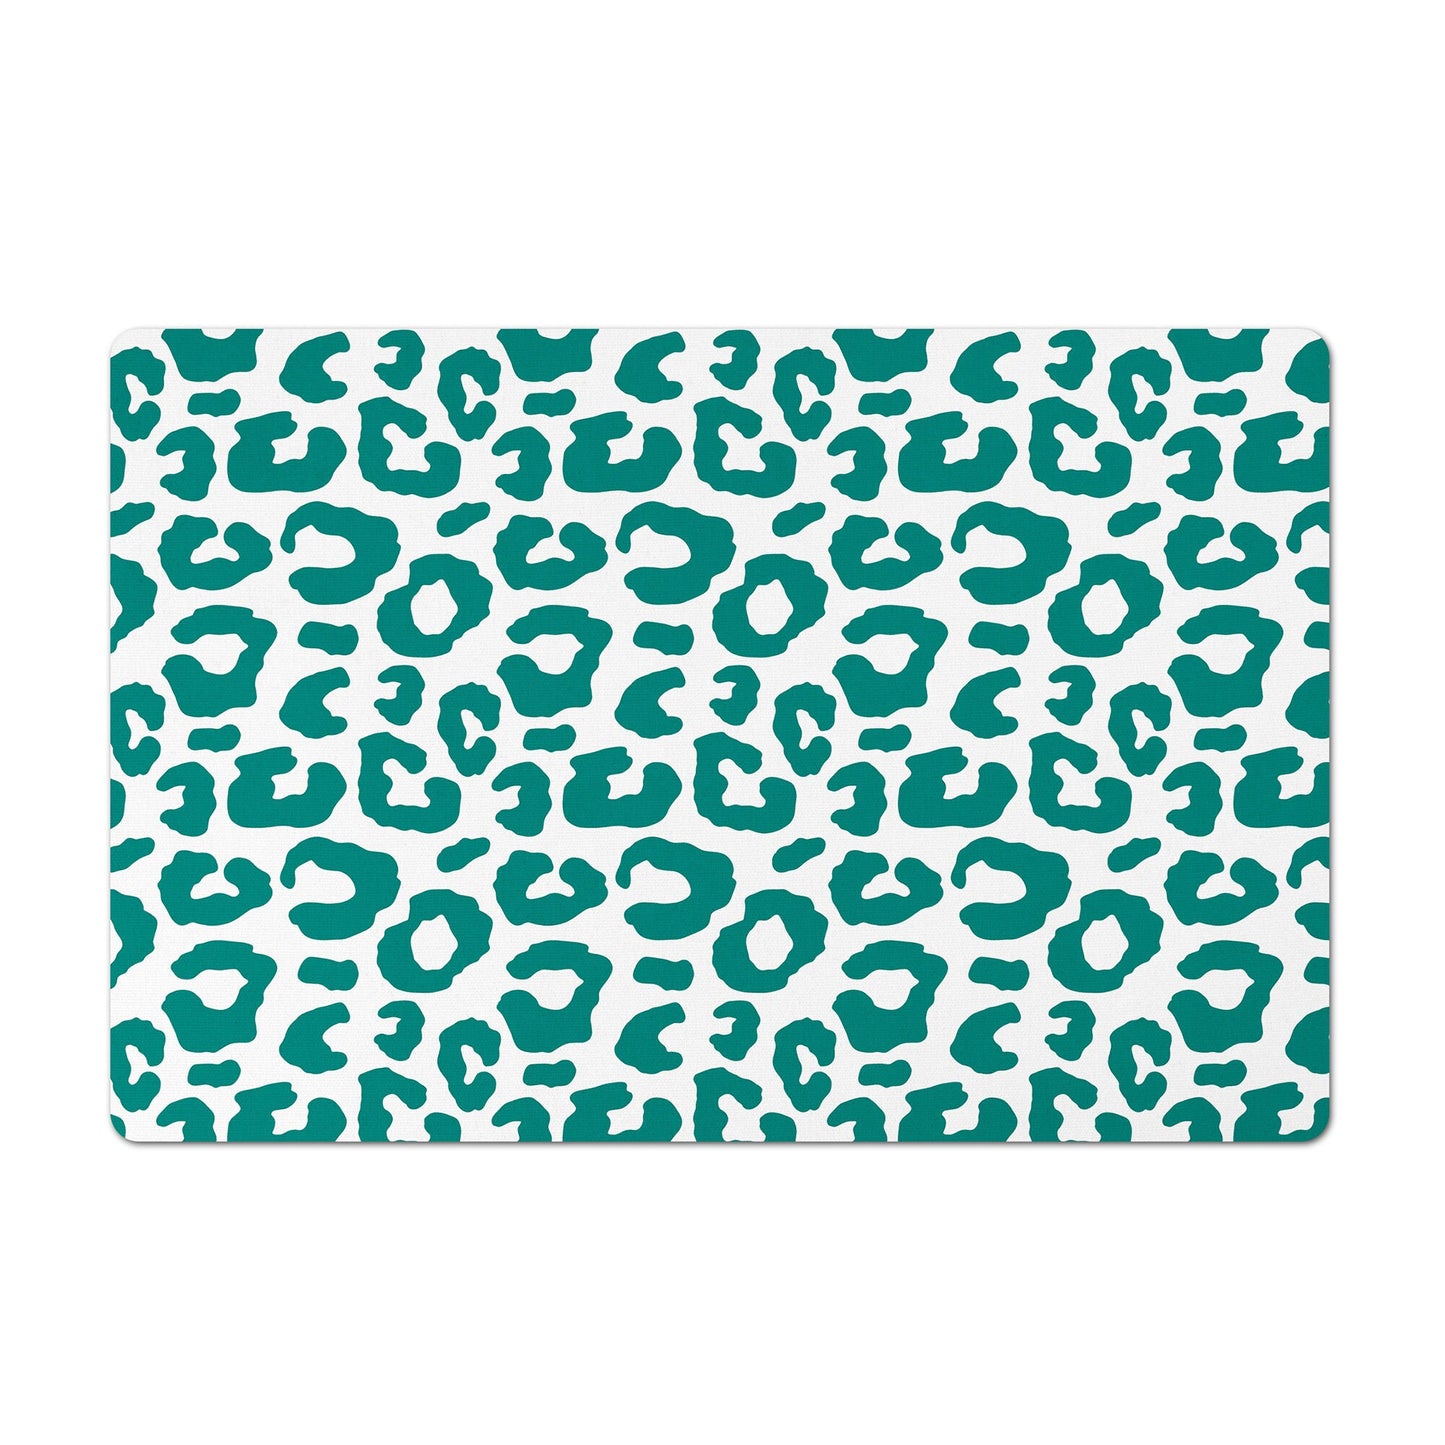 Pet Feeding Mat, Leopard Print, Teal and White